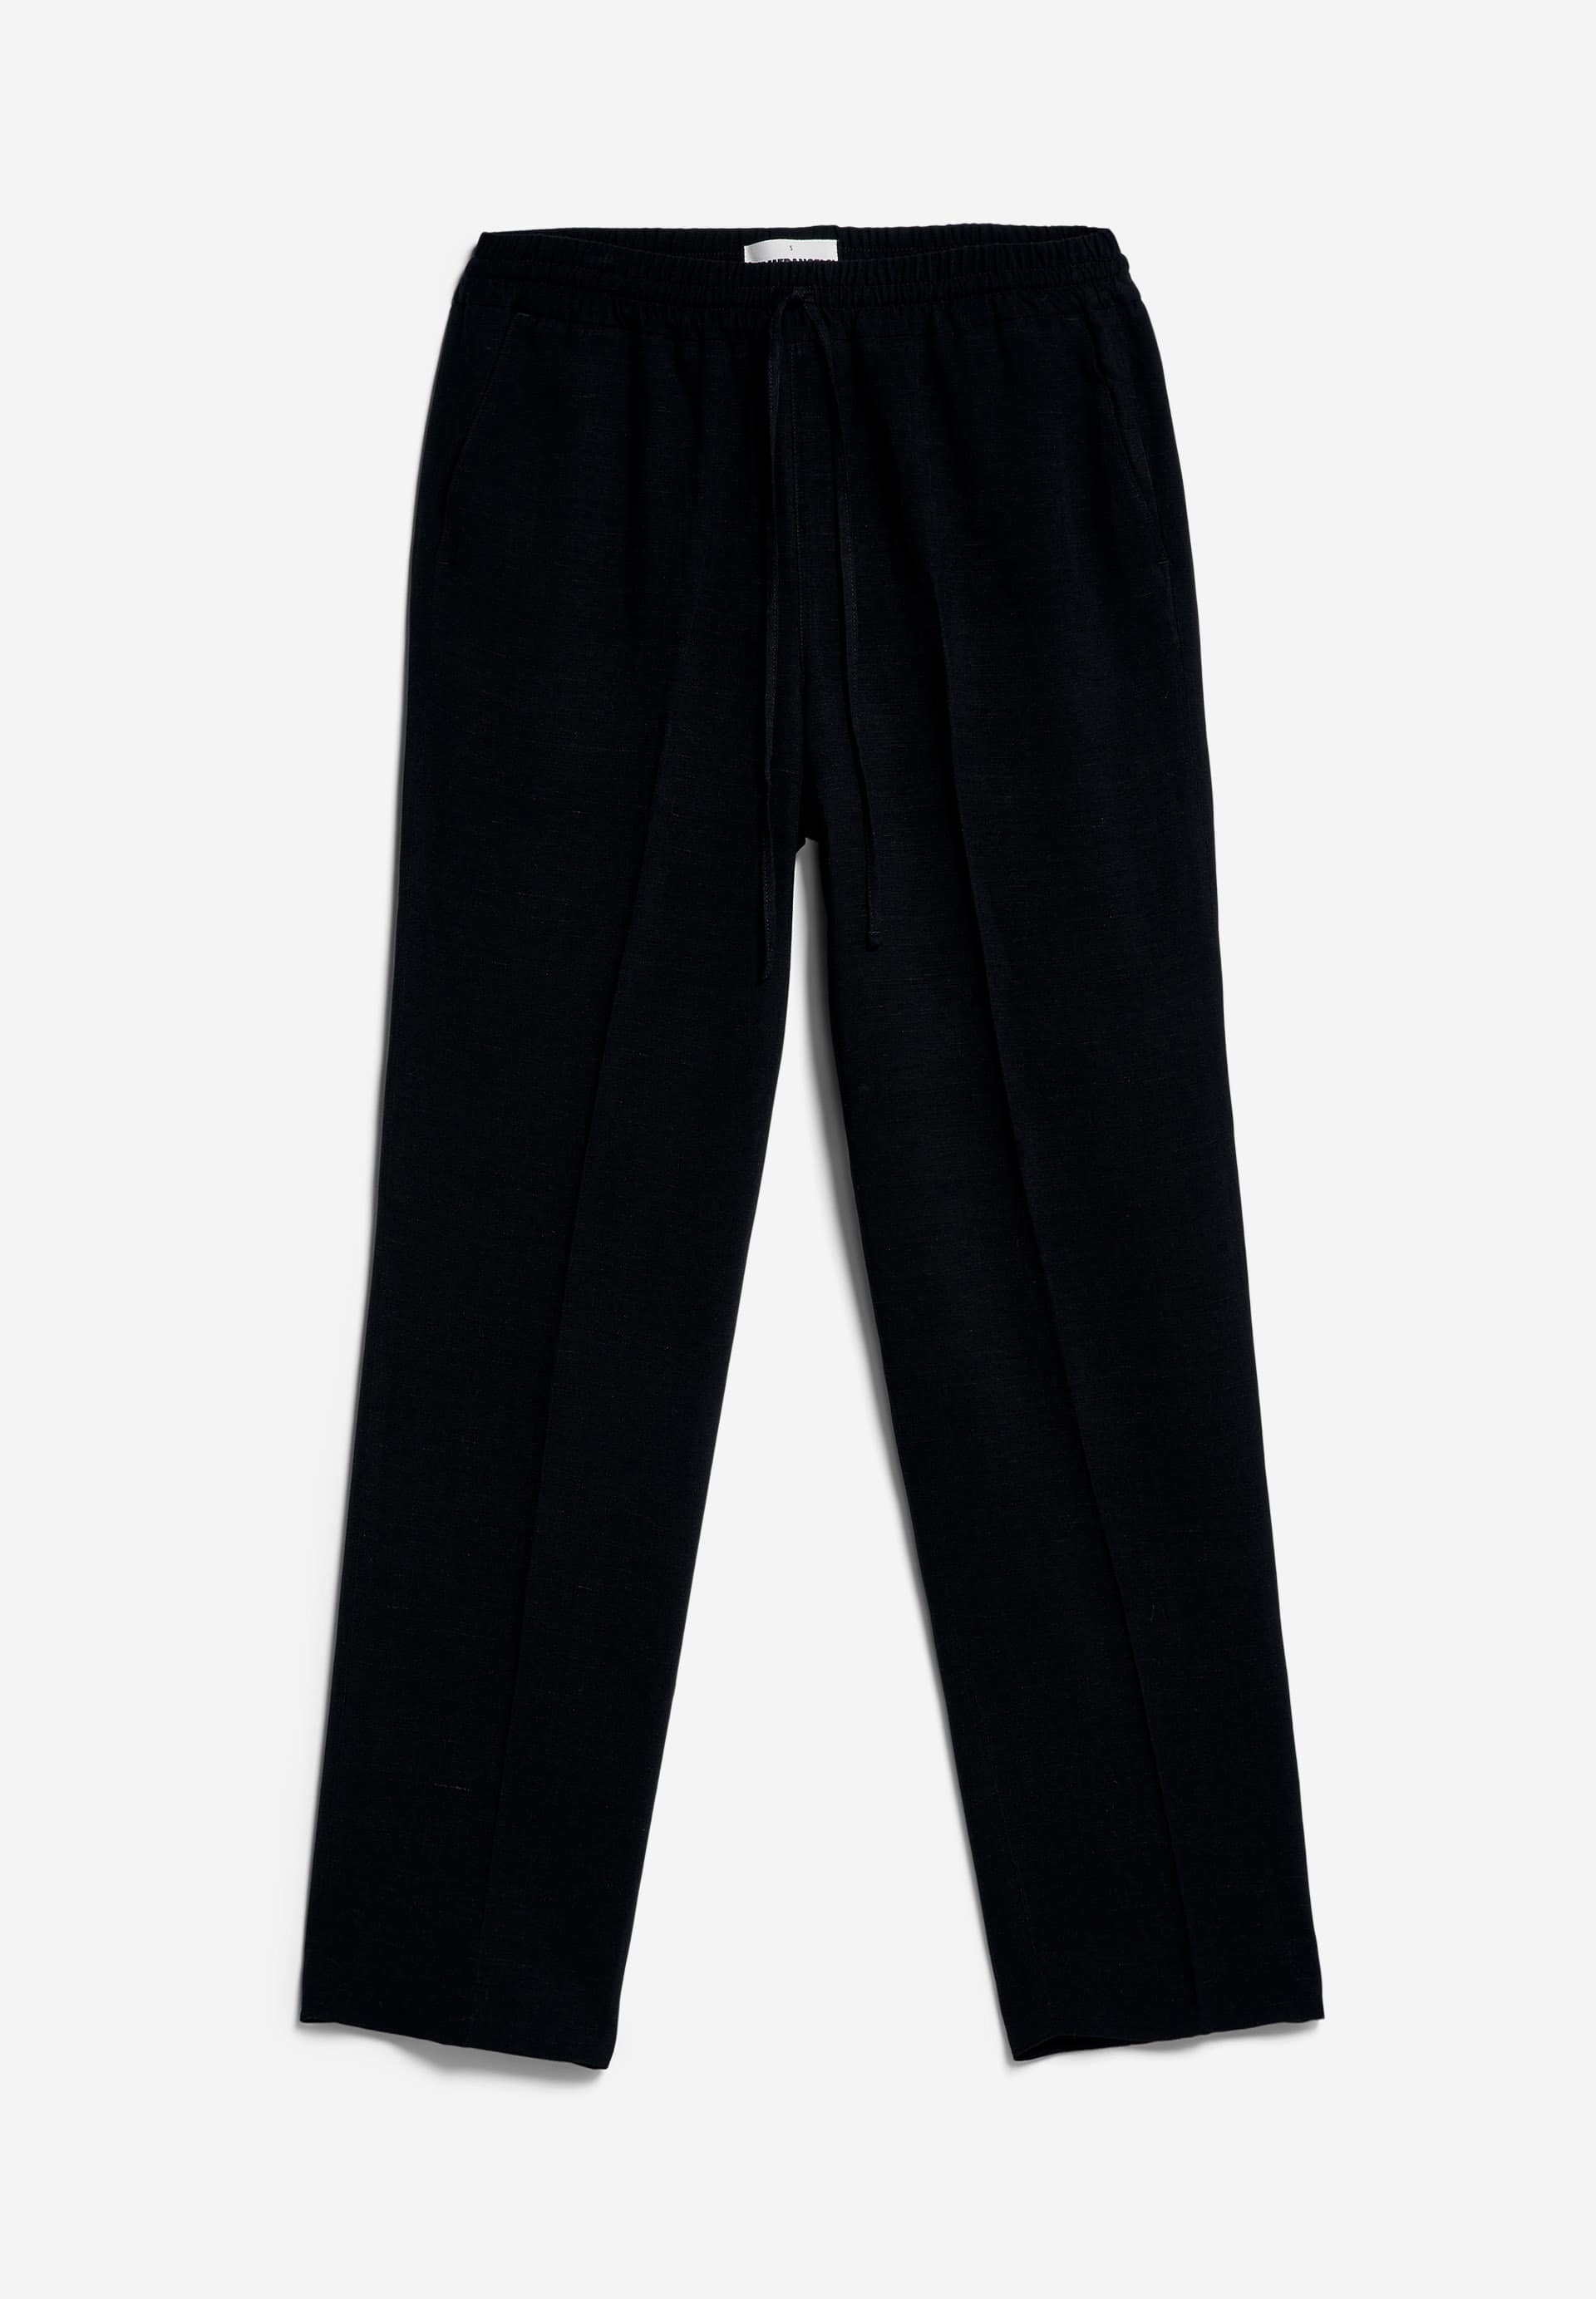 KAADIA TAPERED LINO Woven Pants made of Linen-Mix